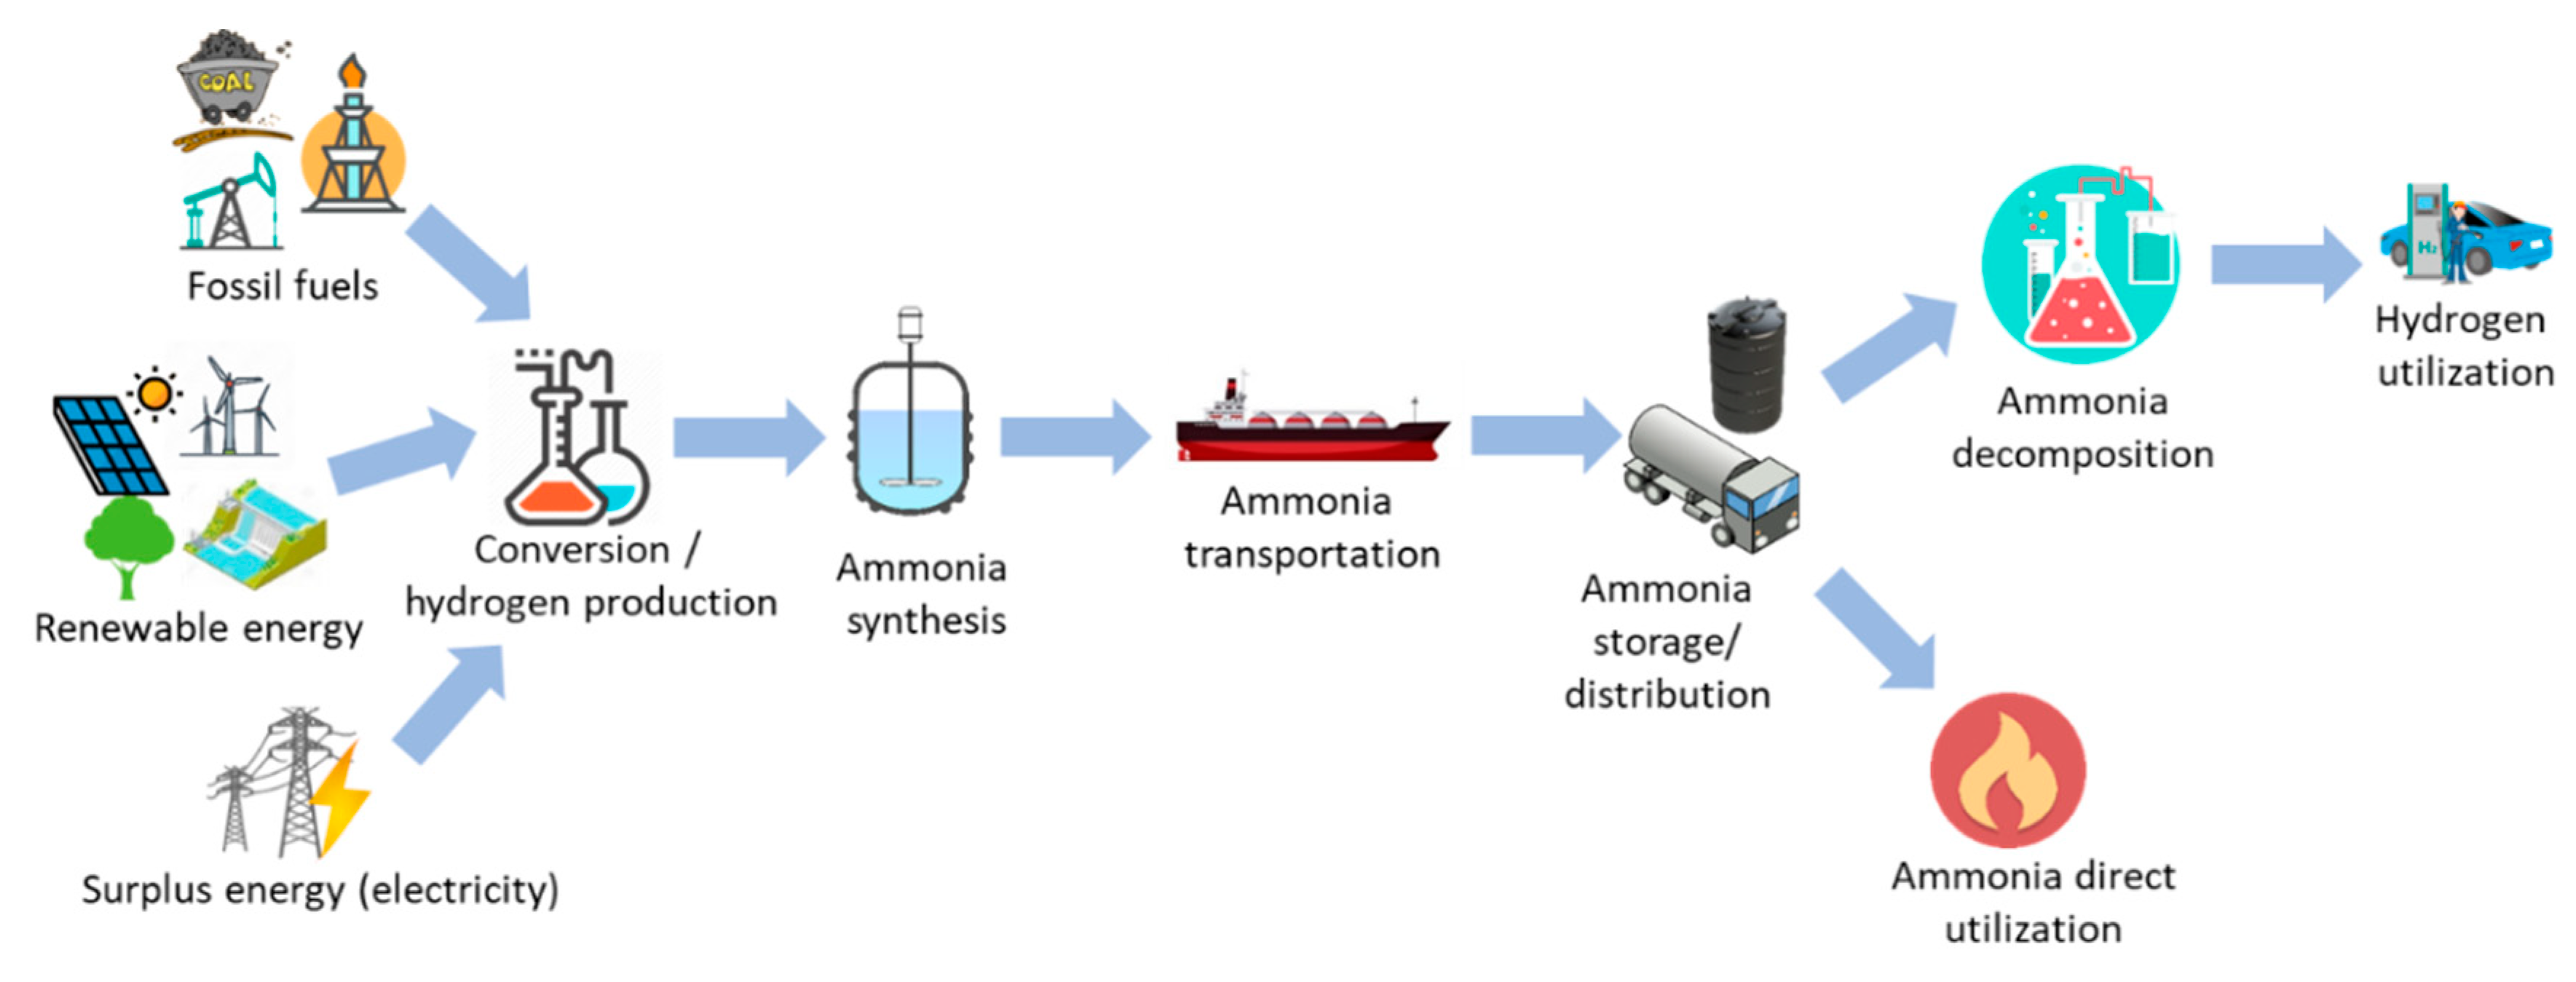 Energies | Free Full-Text | Ammonia as Effective Hydrogen Storage: A on Production, Storage and Utilization